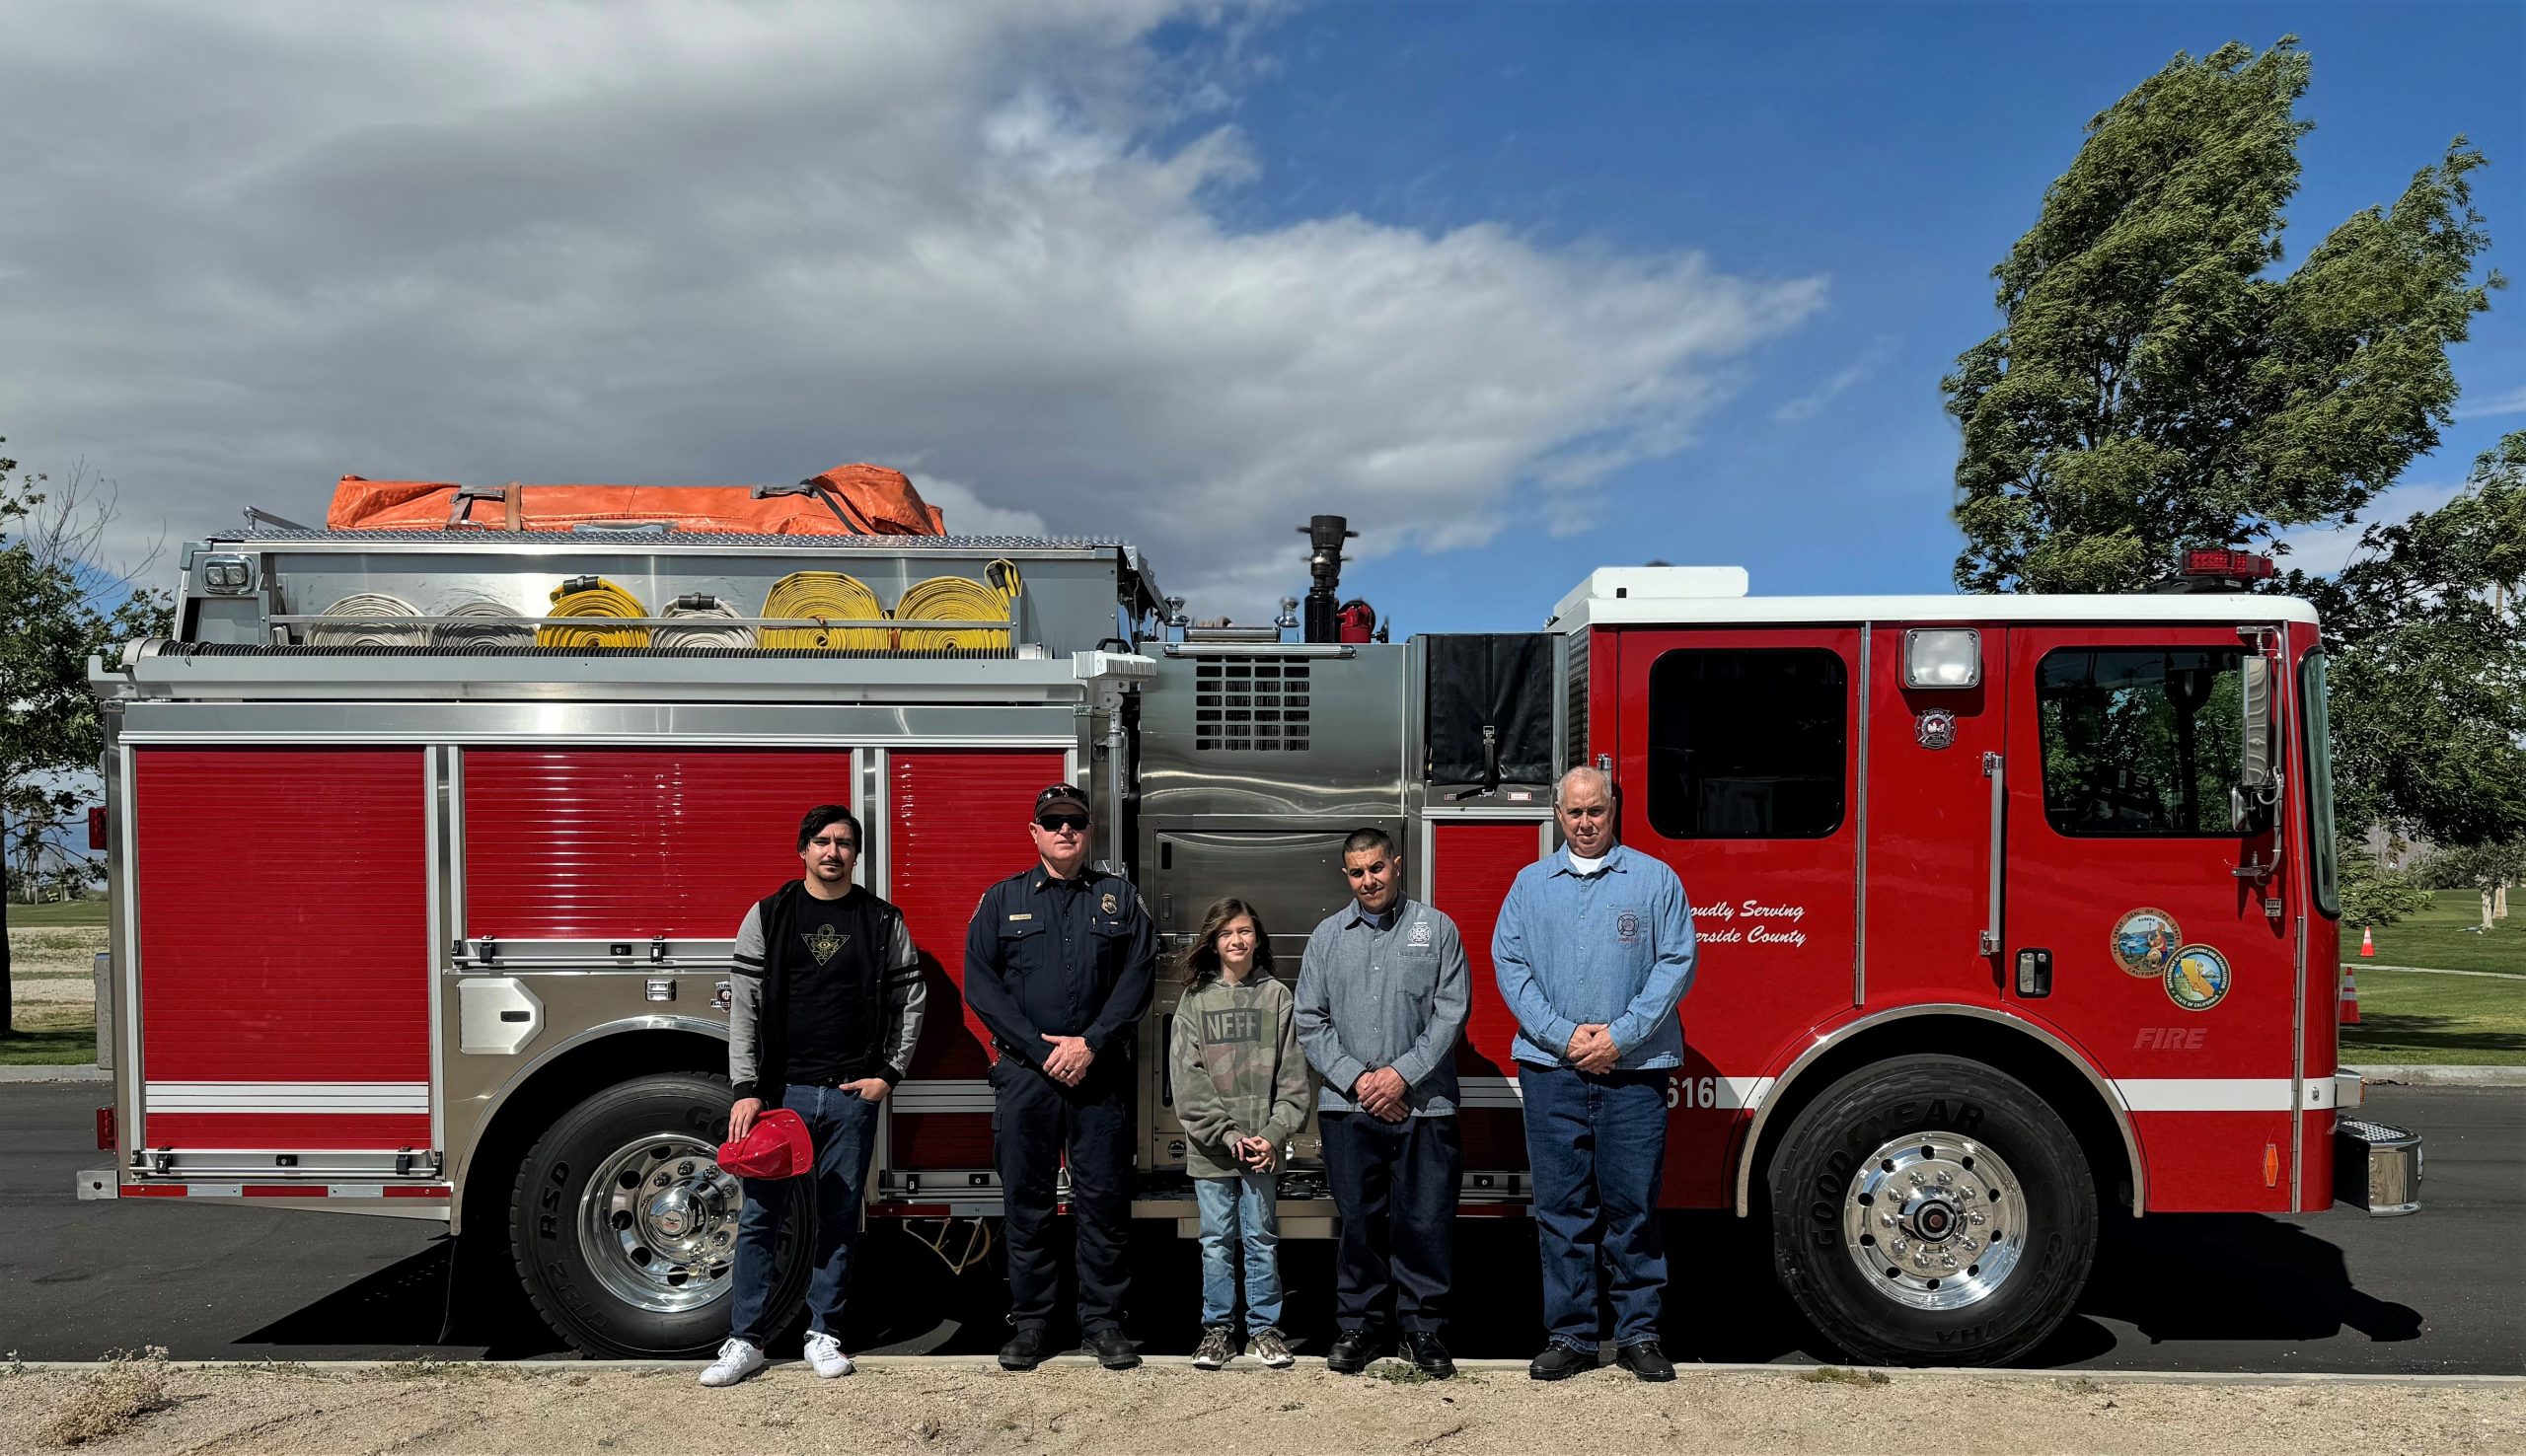 A child and his father with two incarcerated firefighters and a fire chief standing in front of a fire engine.